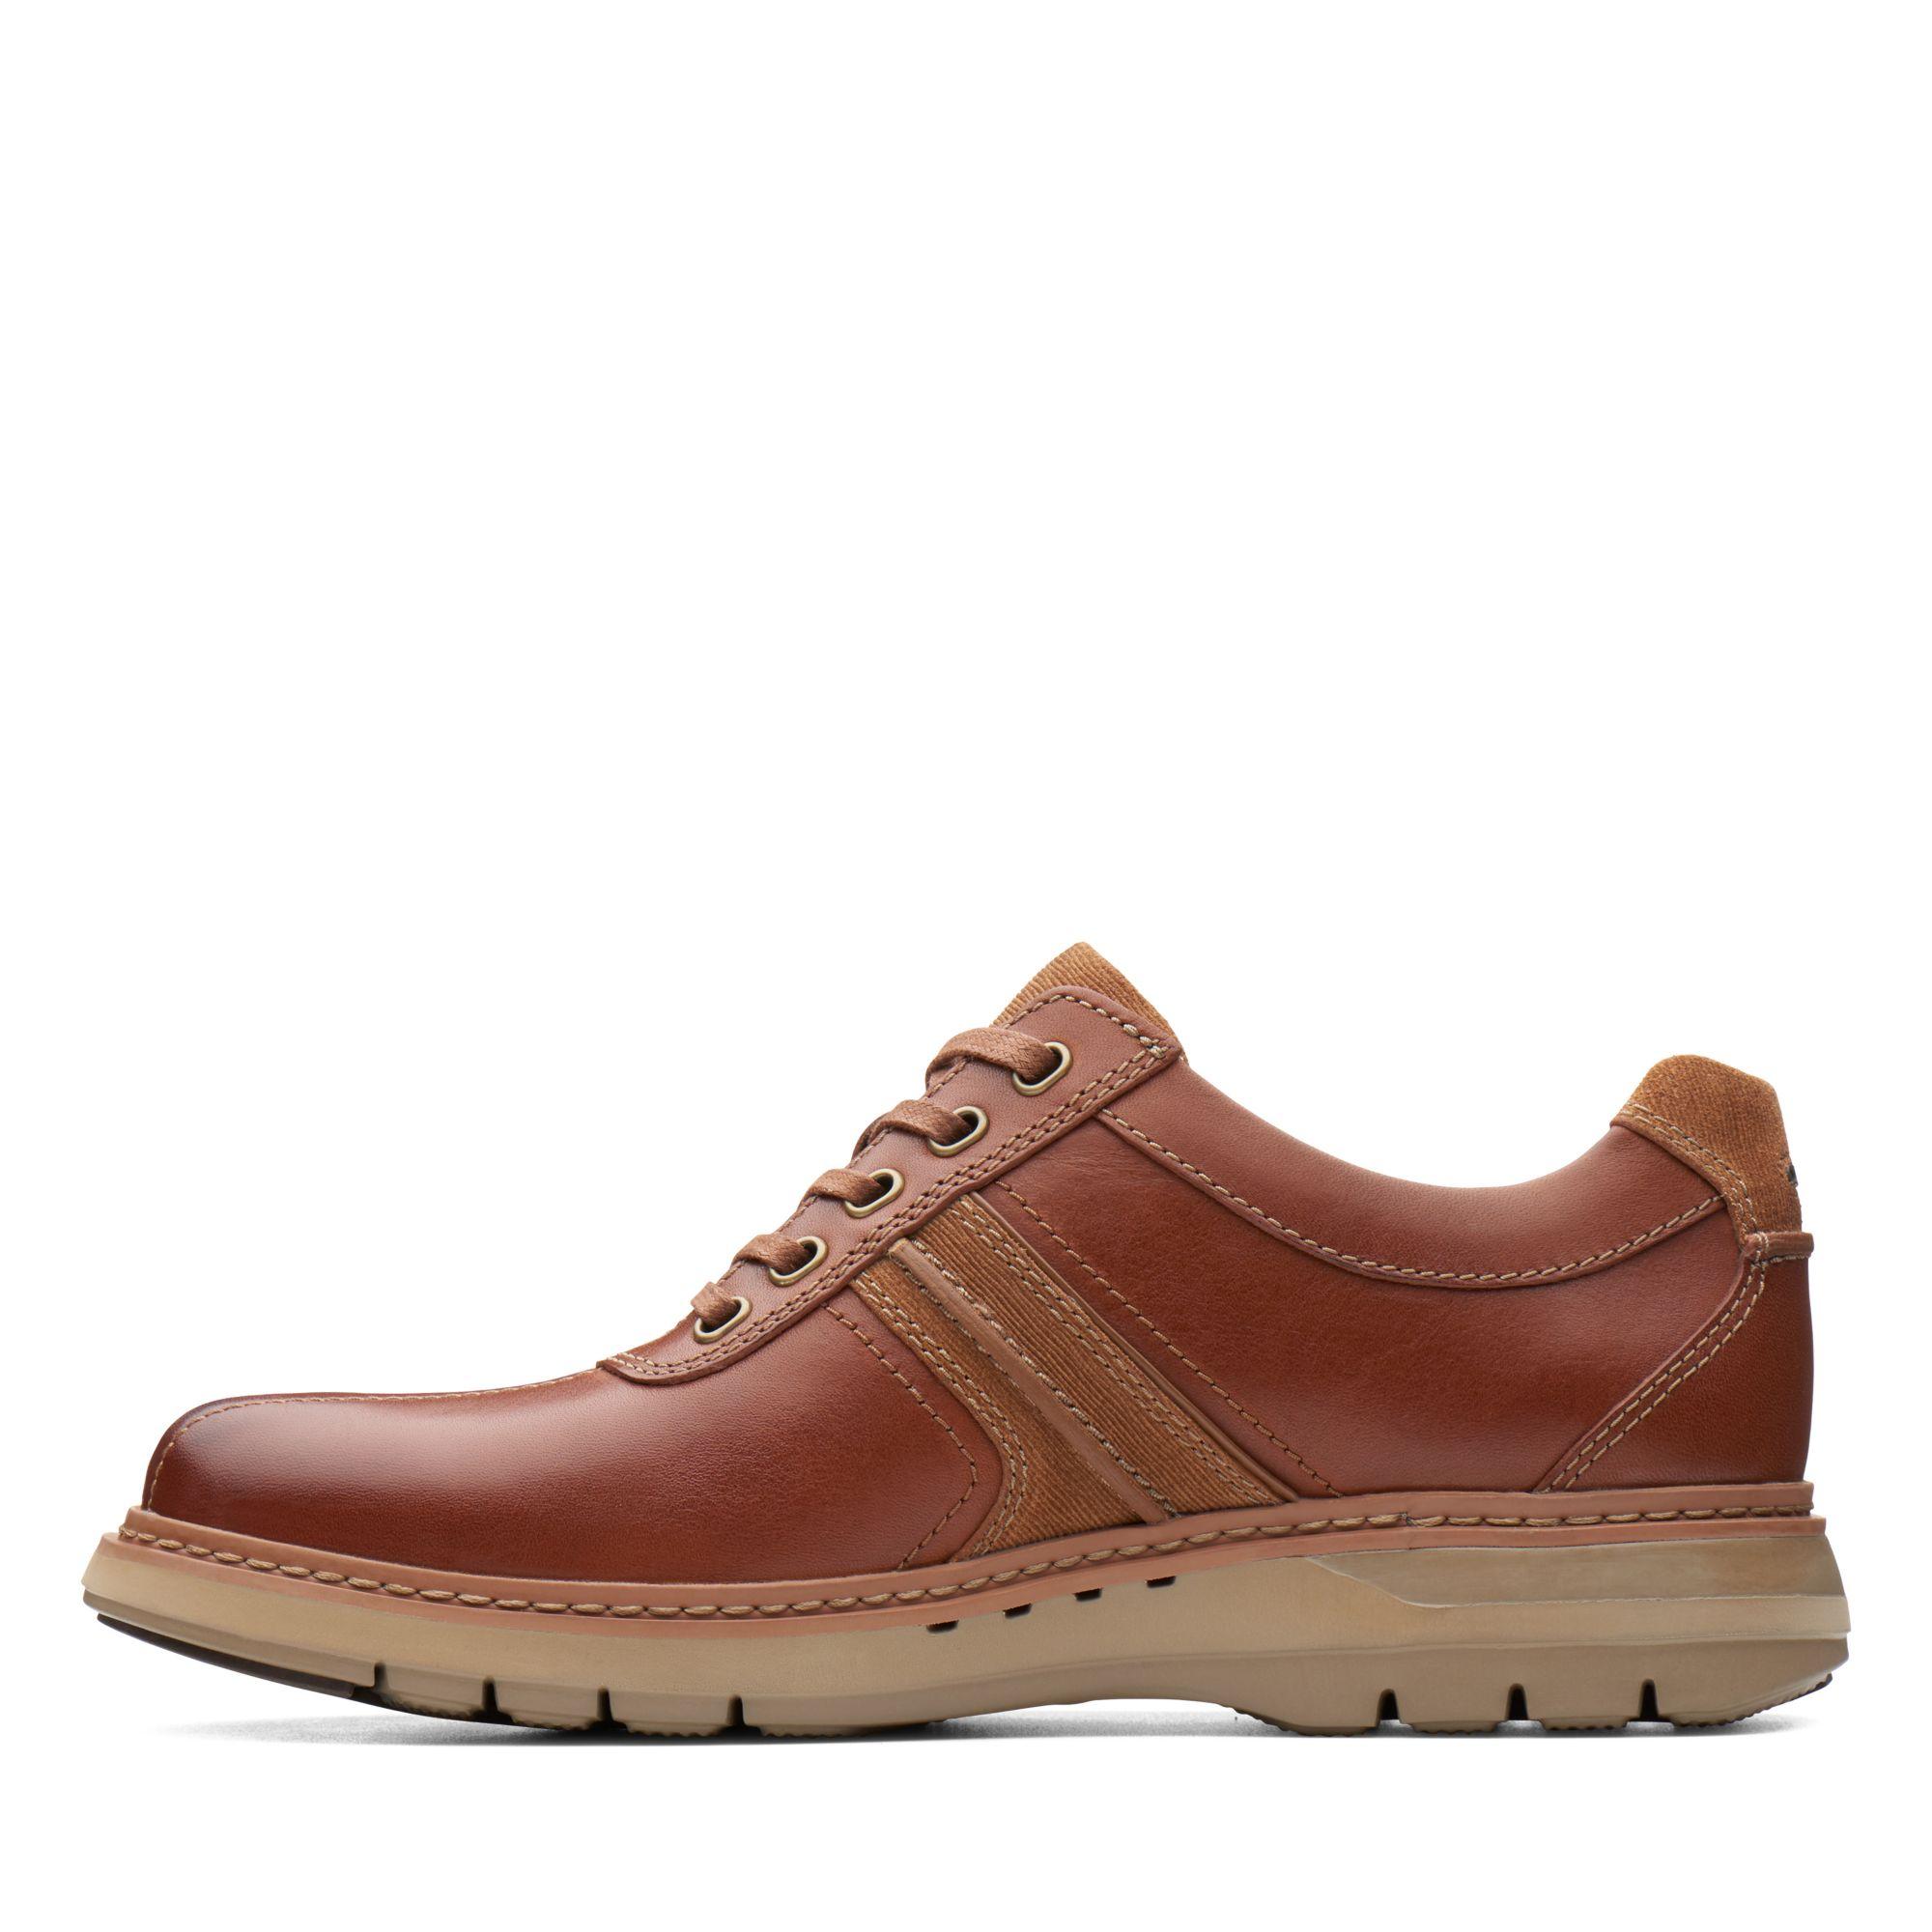 Clarks S Un Ramble Go Leather Sneaker in Dark Tan Leather (Brown) for ...